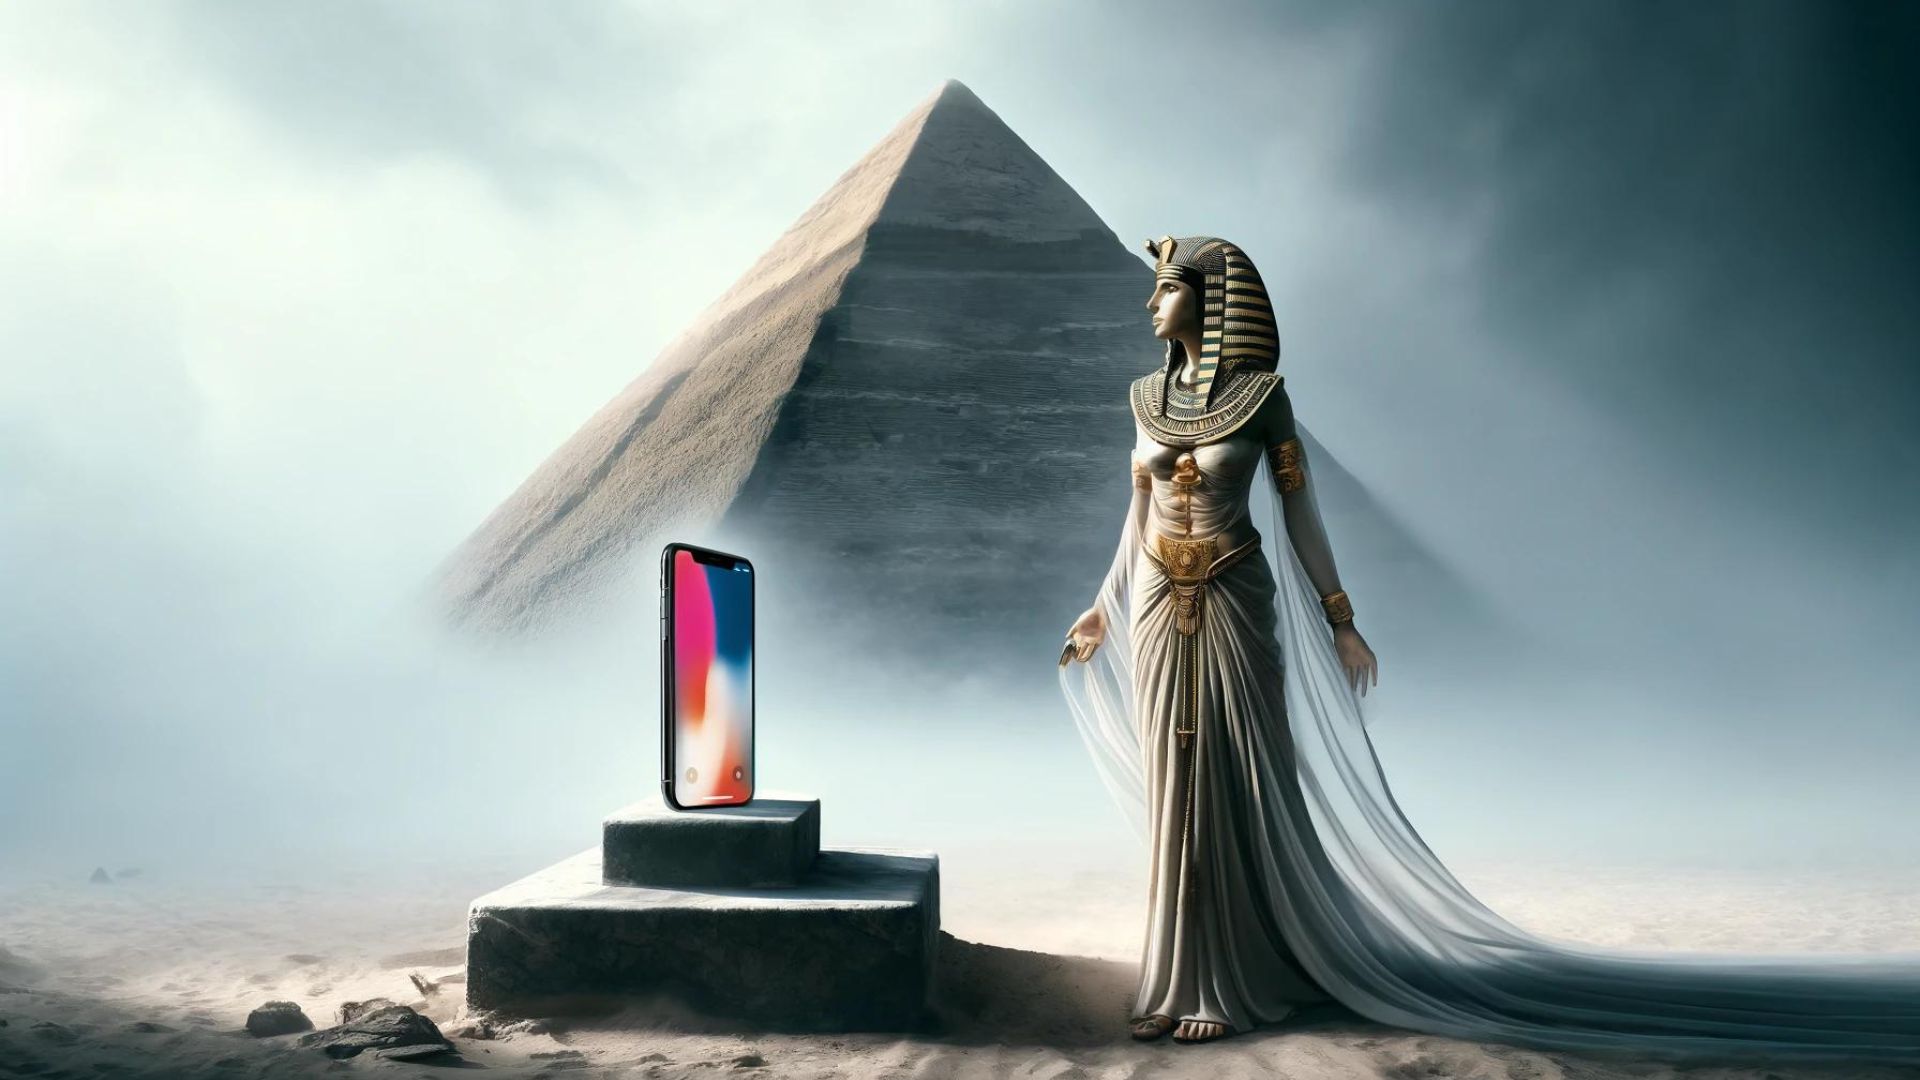 Was Cleopatra closer to the pyramids or the iPhone